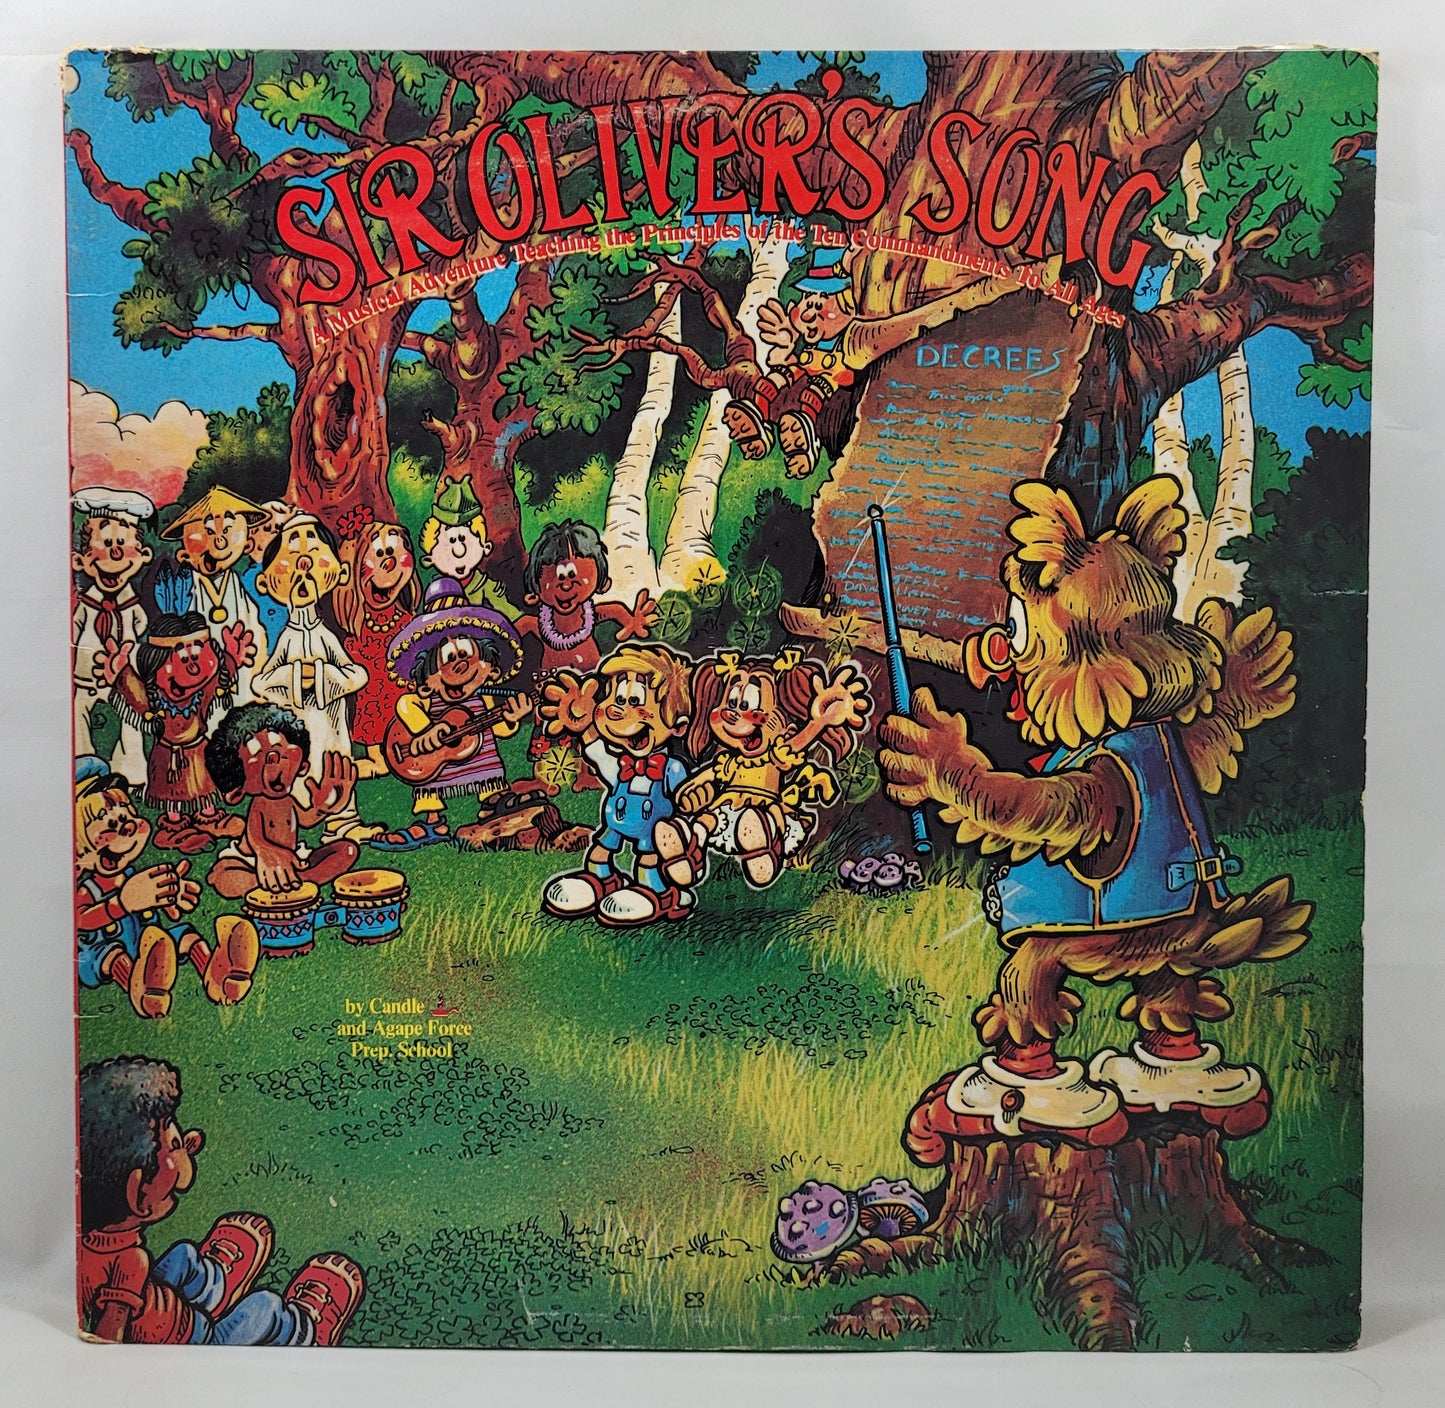 Candle and Agape Force - Sir Oliver's Song: A Musical Adventure Teaching the Principles of the Ten Commandments to All Ages [1979 Used Vinyl Record LP]